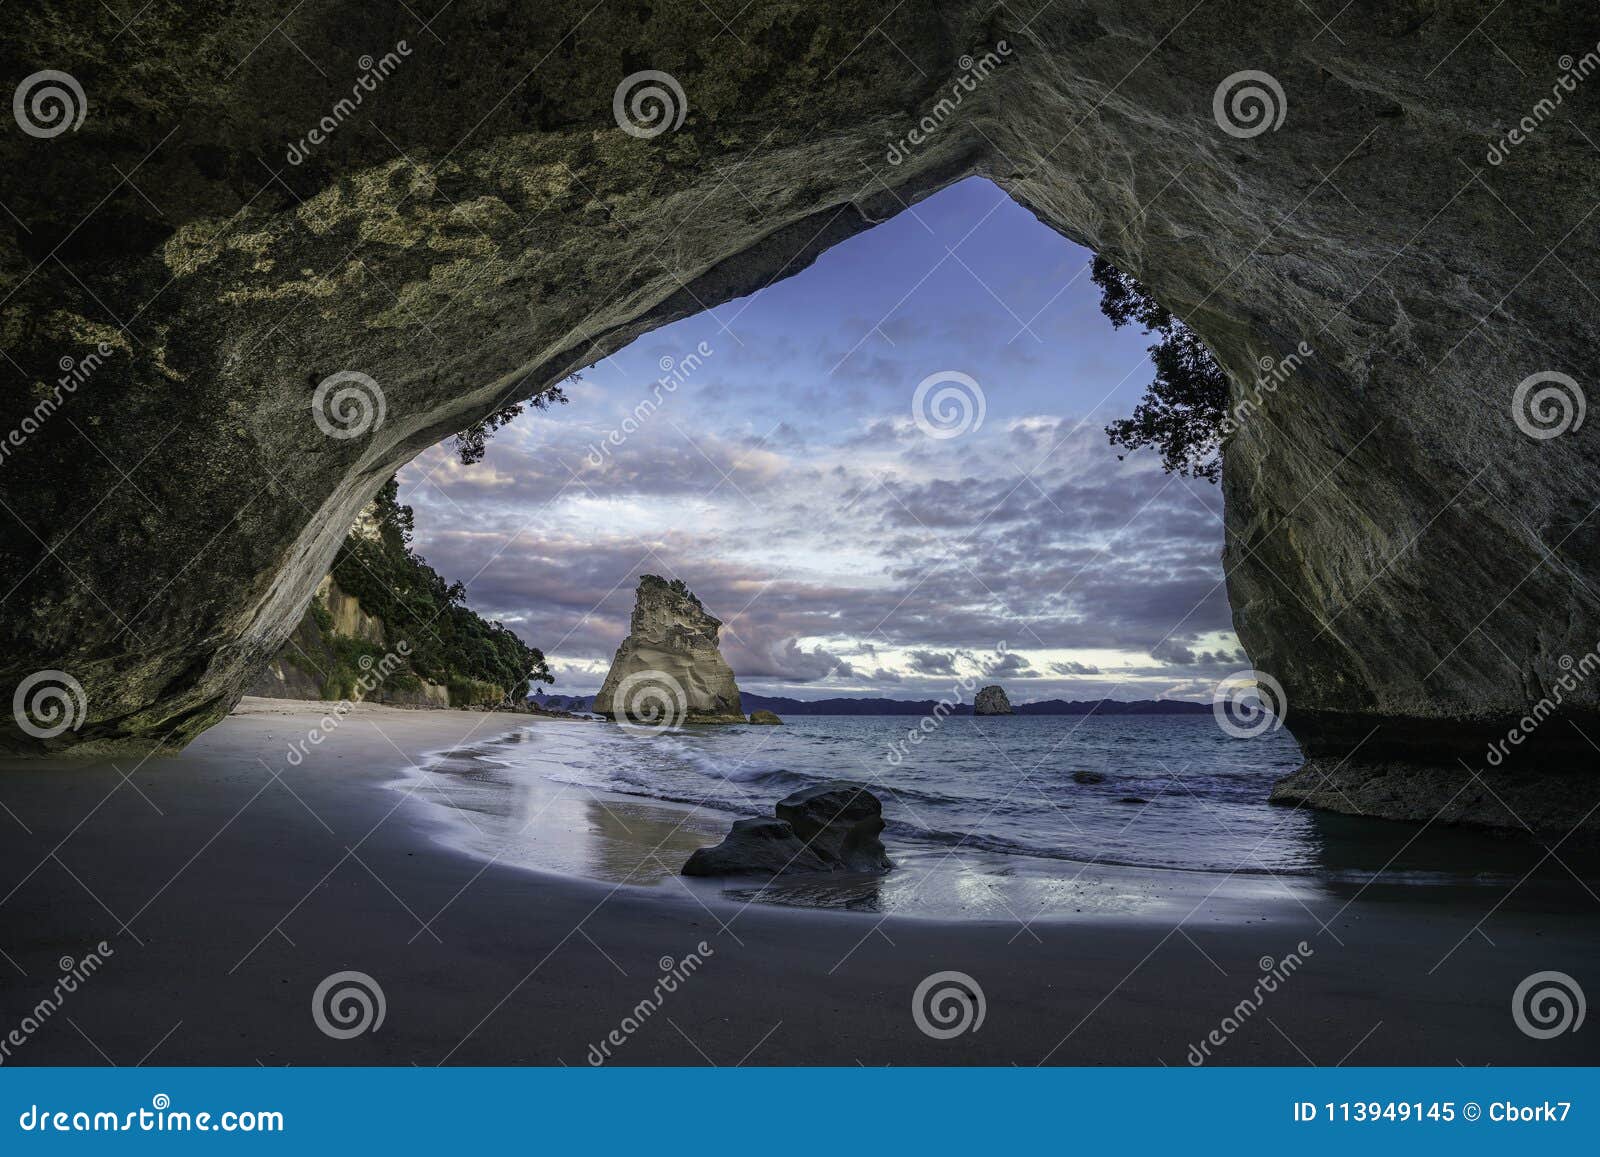 View from the cave at cathedral cove beach,coromandel,new zealand